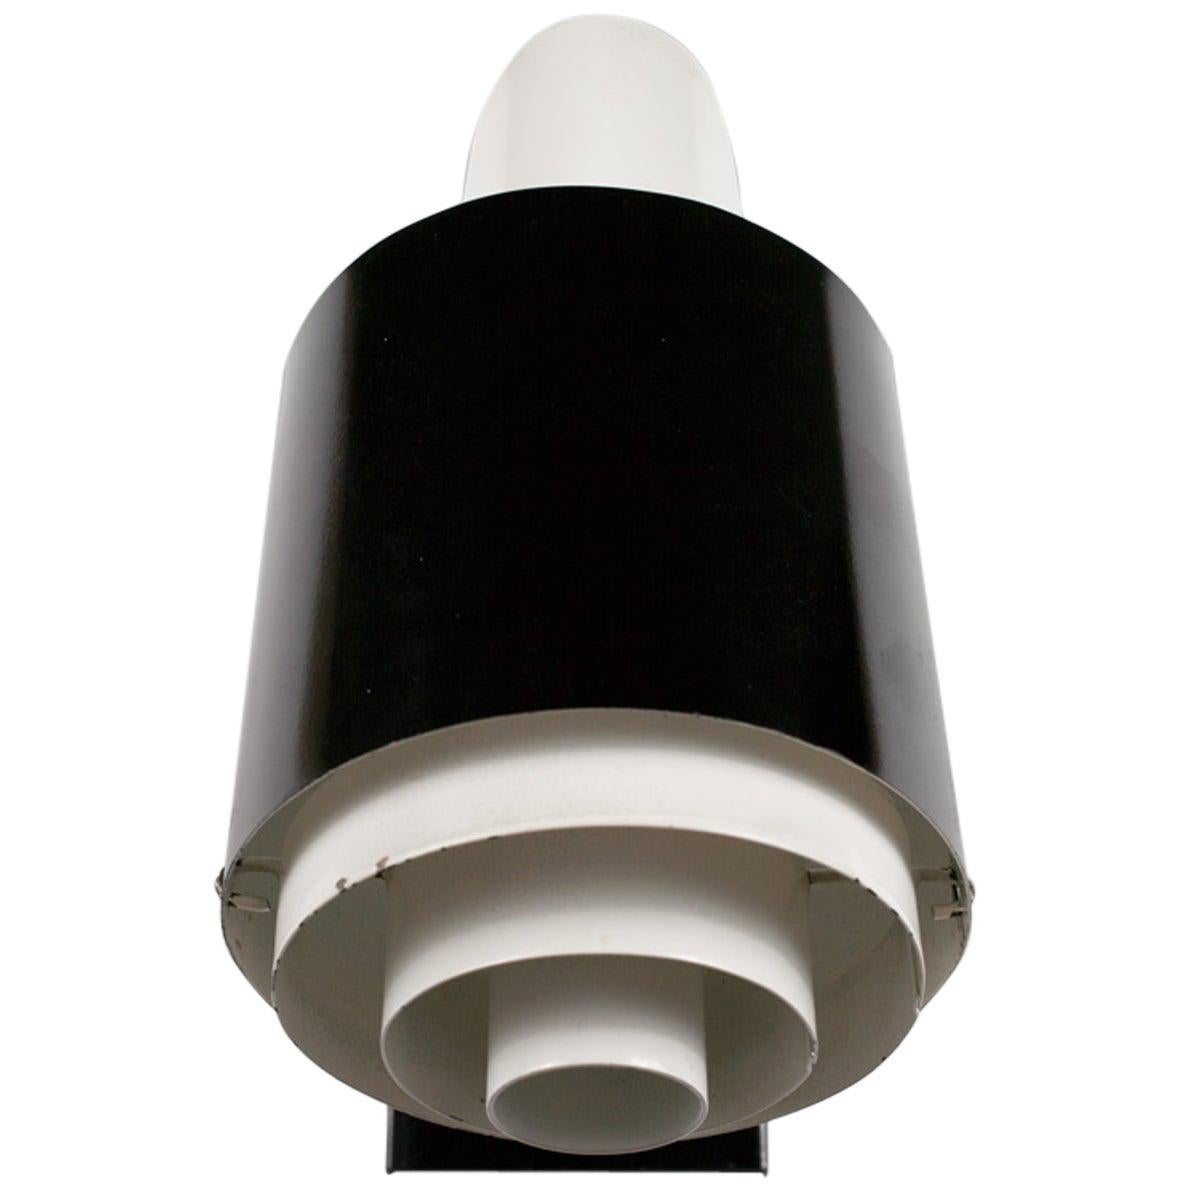 Midcentury French Wall Lamp Jackfluor by Novalux, Black and White Metal, 1950s For Sale